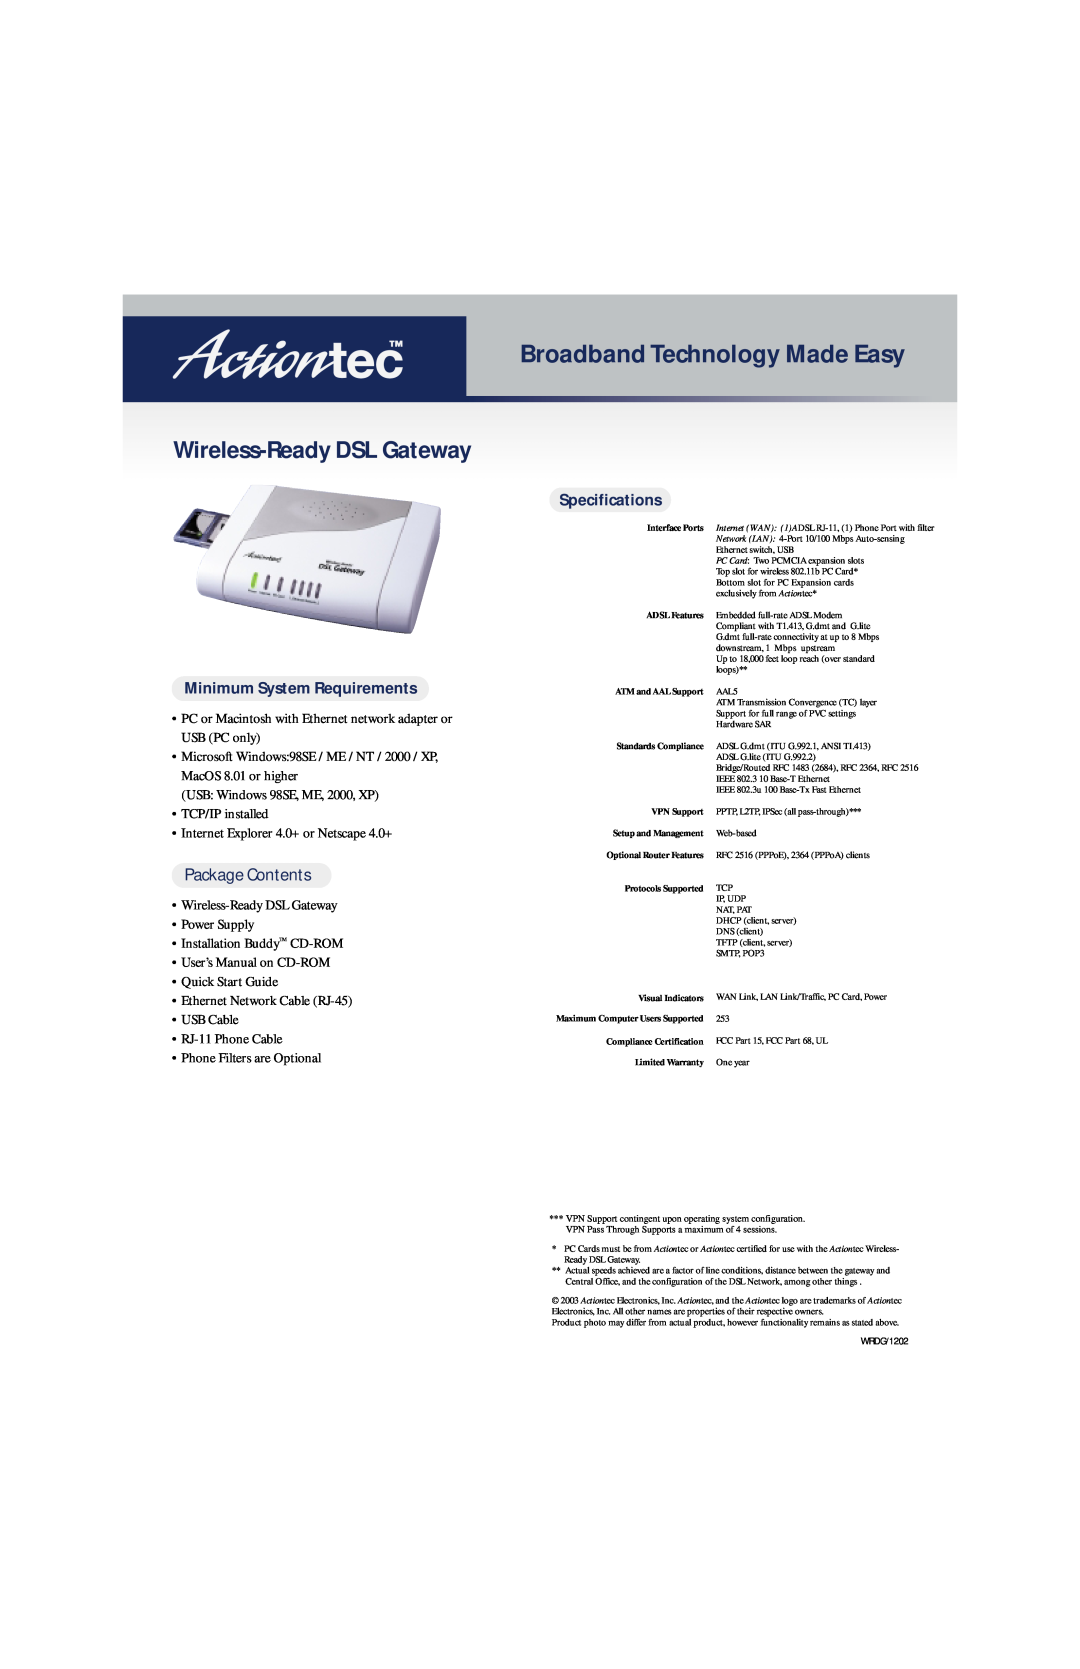 Actiontec electronic R1524SU Wireless-Ready DSL Gateway, Minimum System Requirements, Package Contents, Specifications 